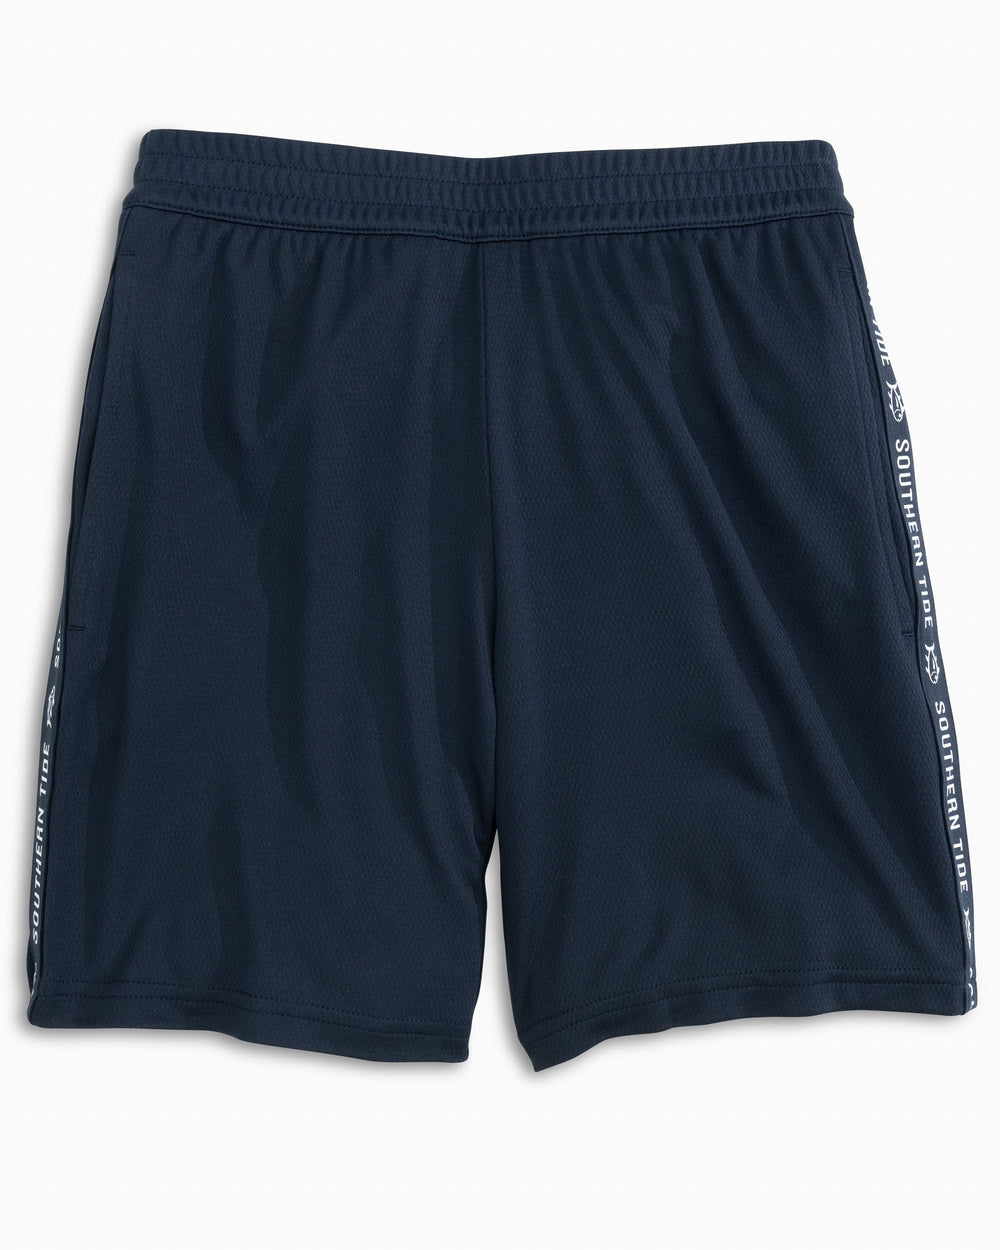 The front view of the Kid's Melink Short by Southern Tide - True Navy